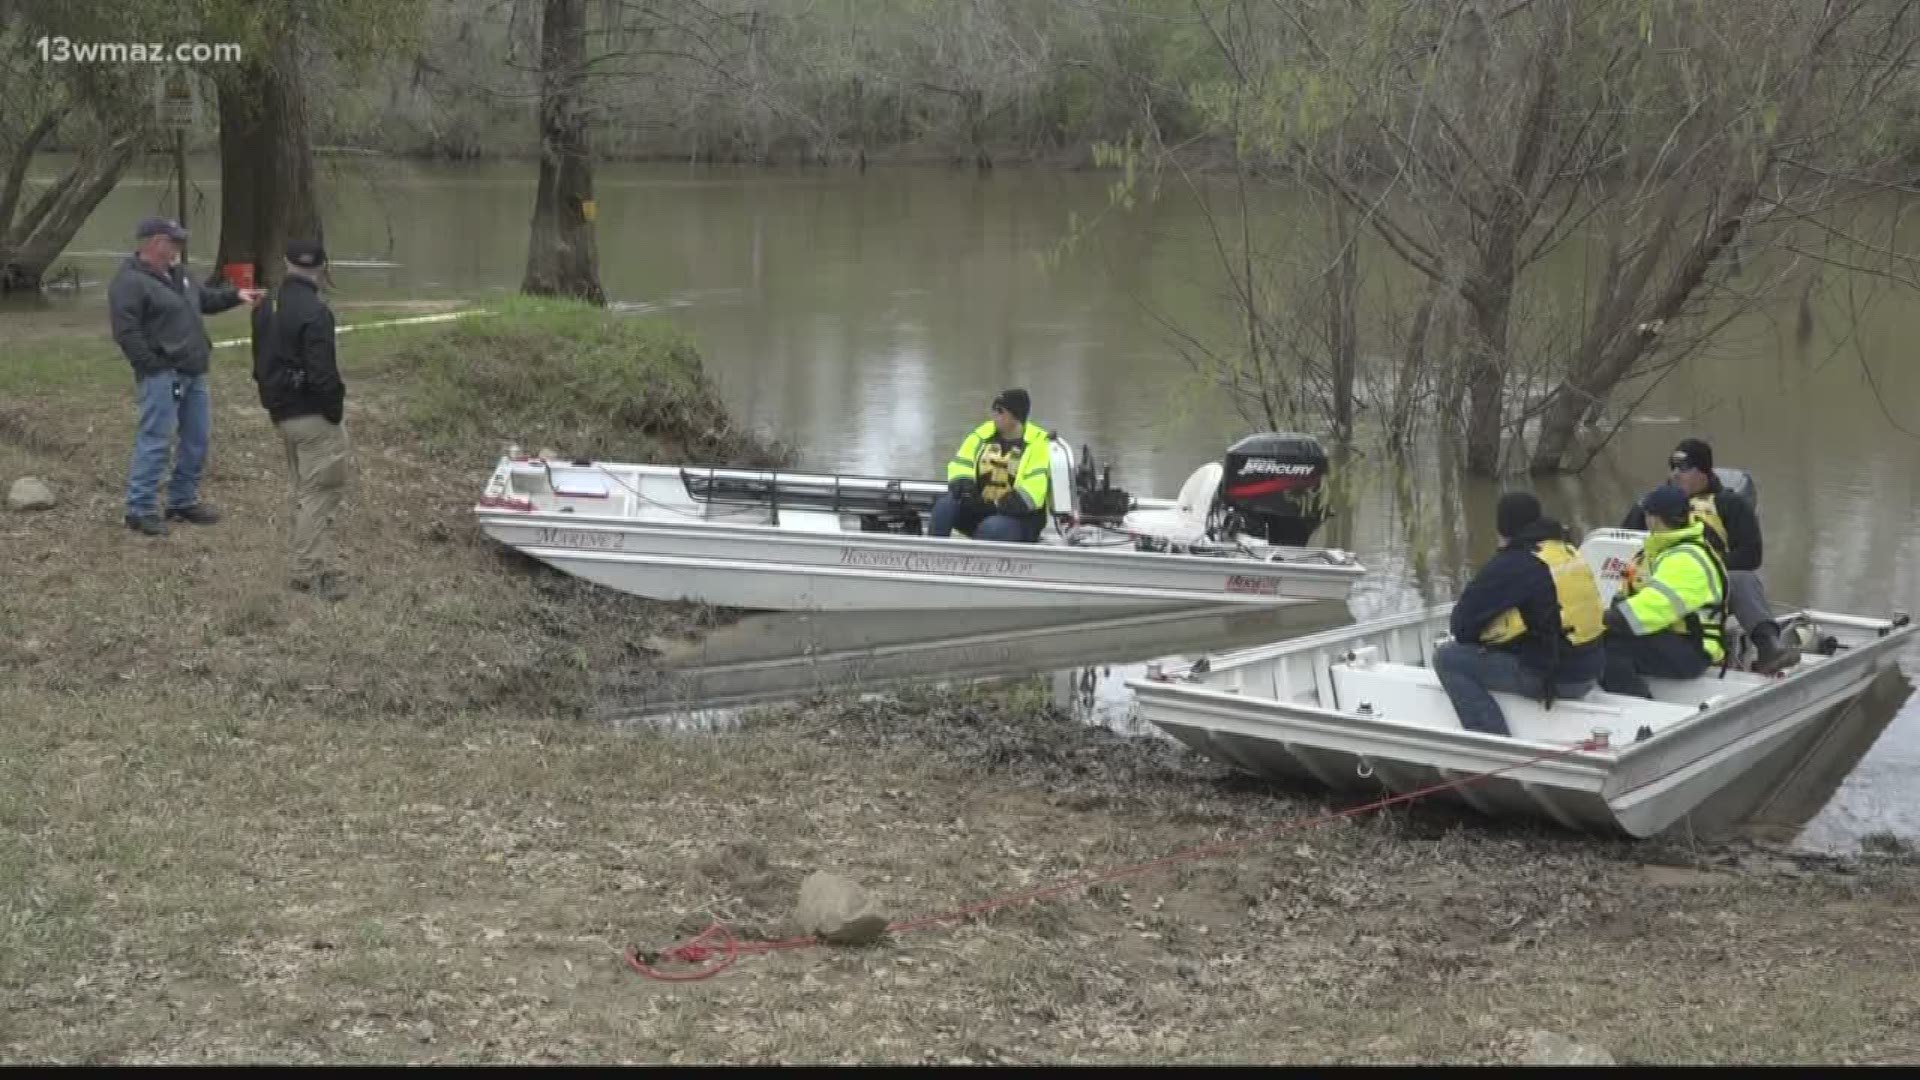 His boat was found on the bank of the Ocmulgee River on Thursday. Since then, search crews have been out looking for him in Bleckley County.